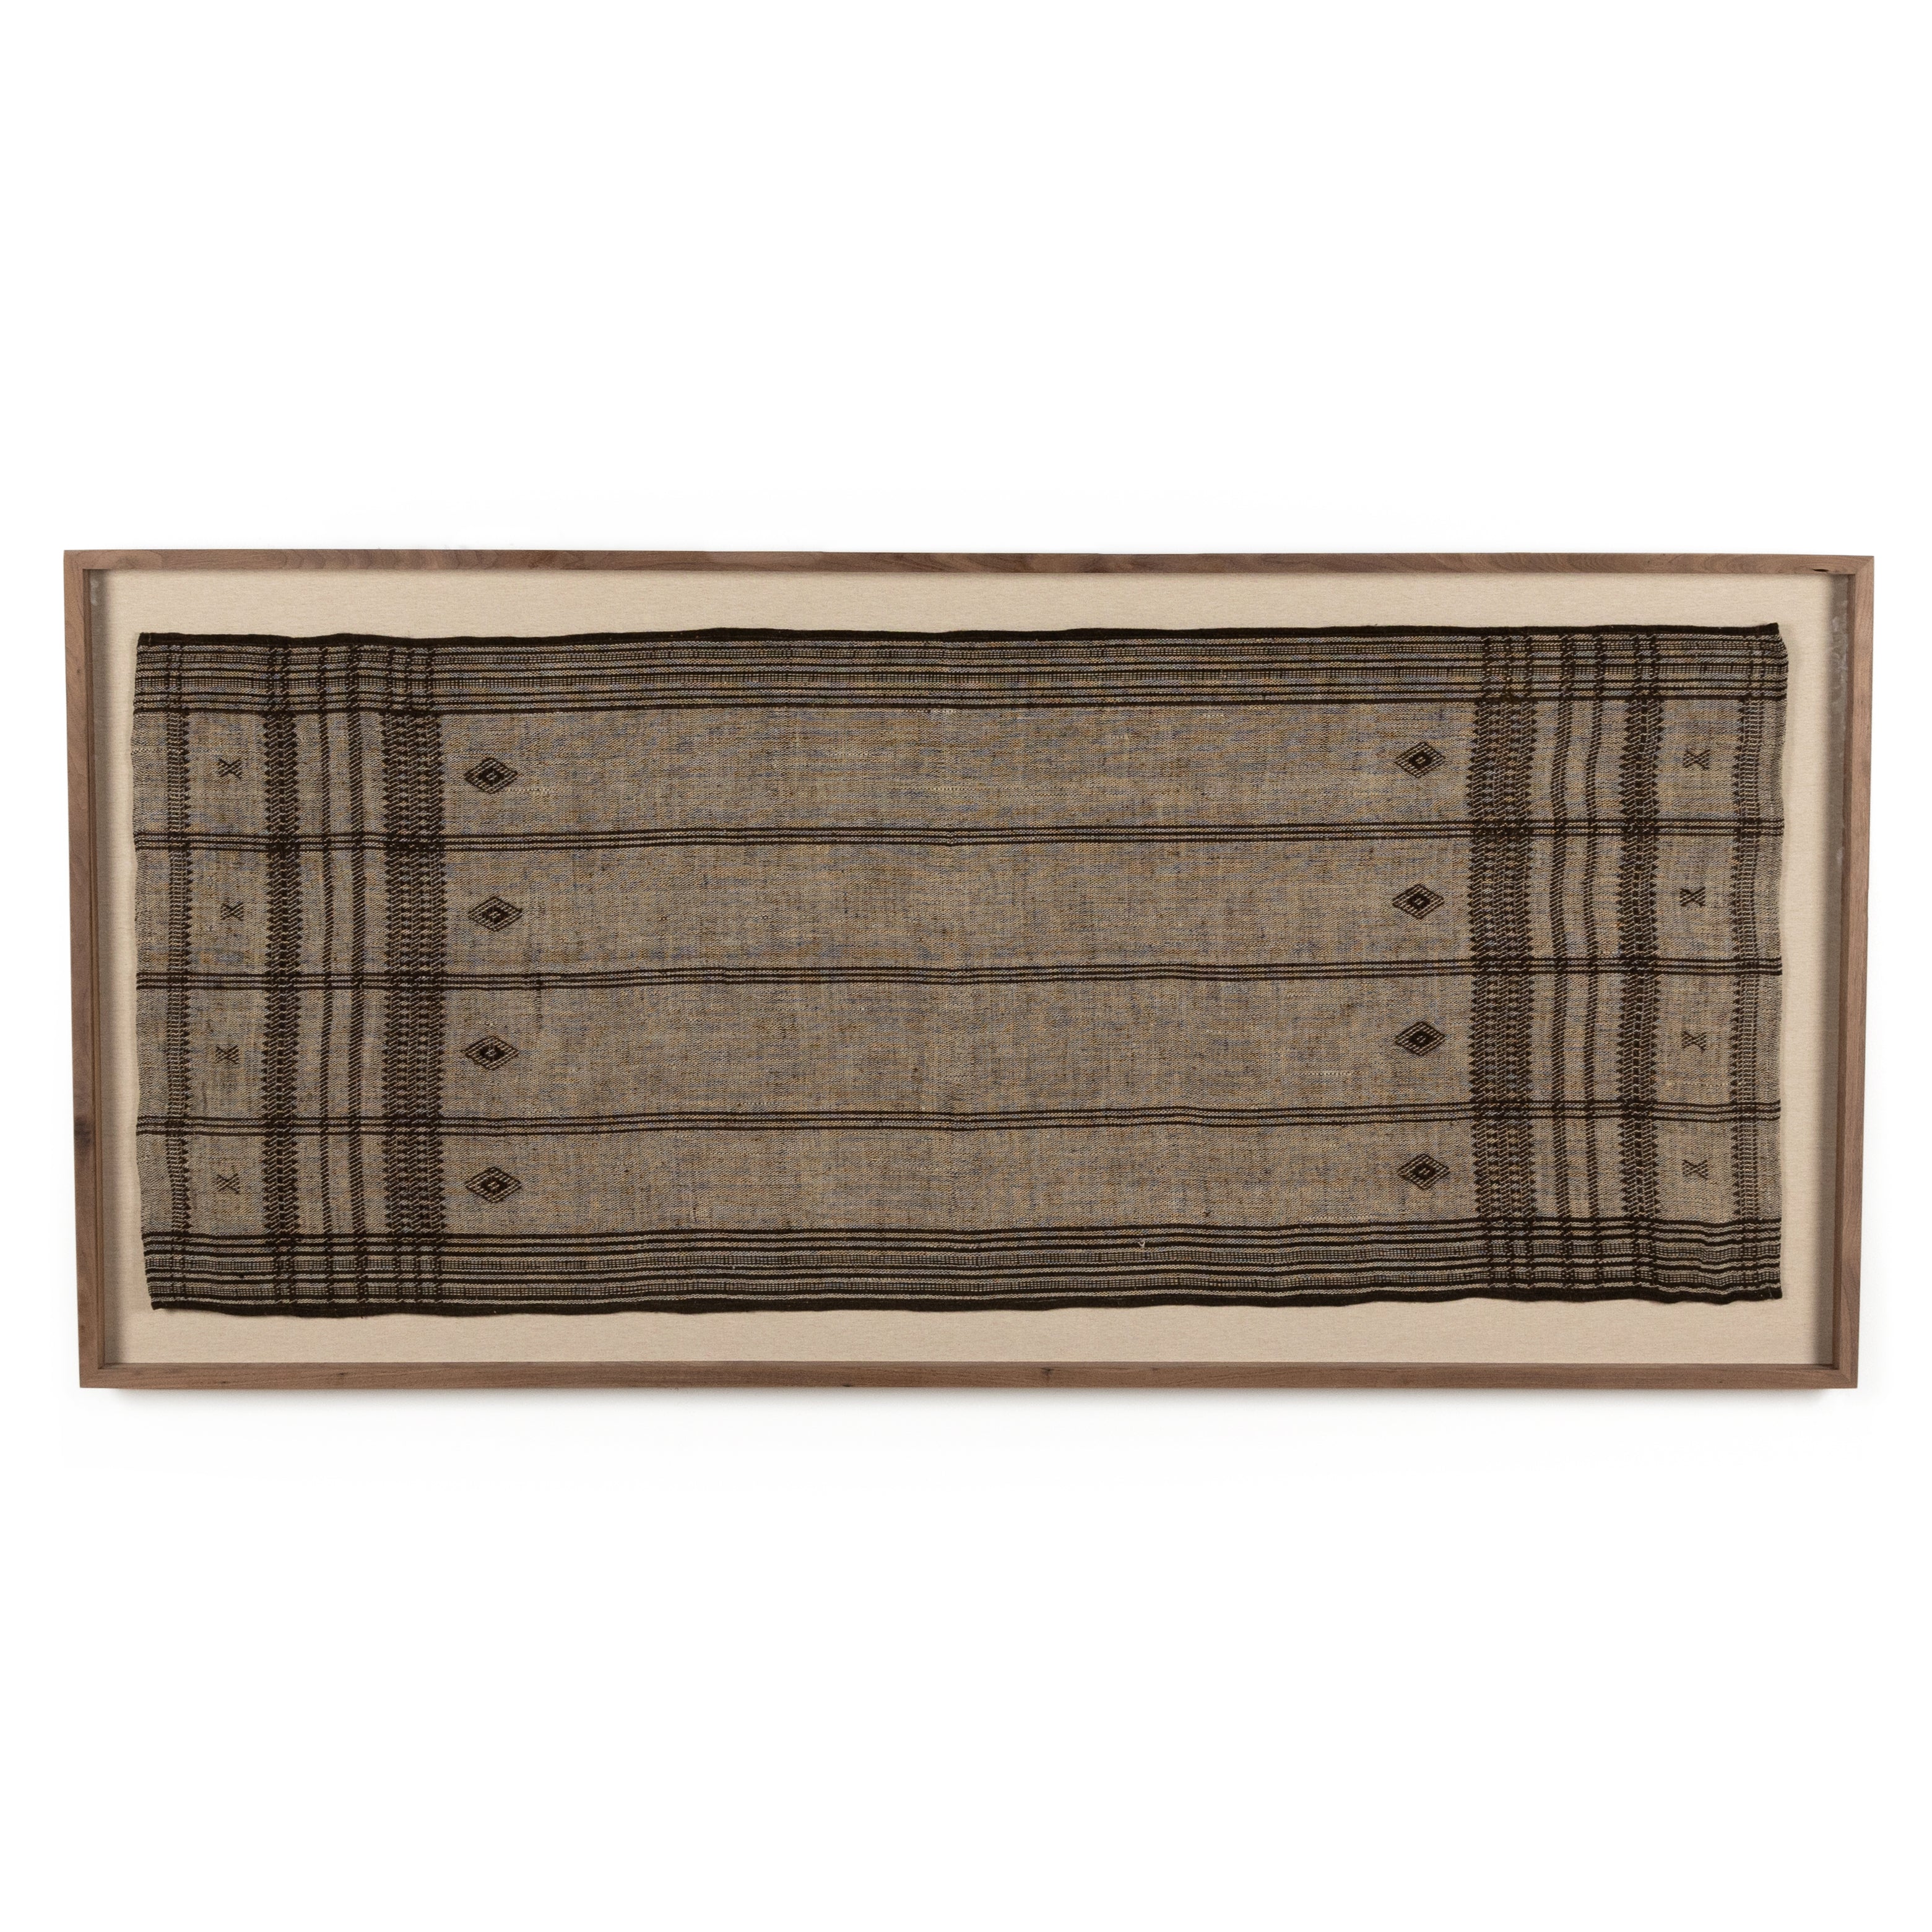 A Bhujodi-style textile is framed within rustic walnut for a gallery-quality look. Handmade in Austin, Texas. Amethyst Home provides interior design, new home construction design consulting, vintage area rugs, and lighting in the Tampa metro area.